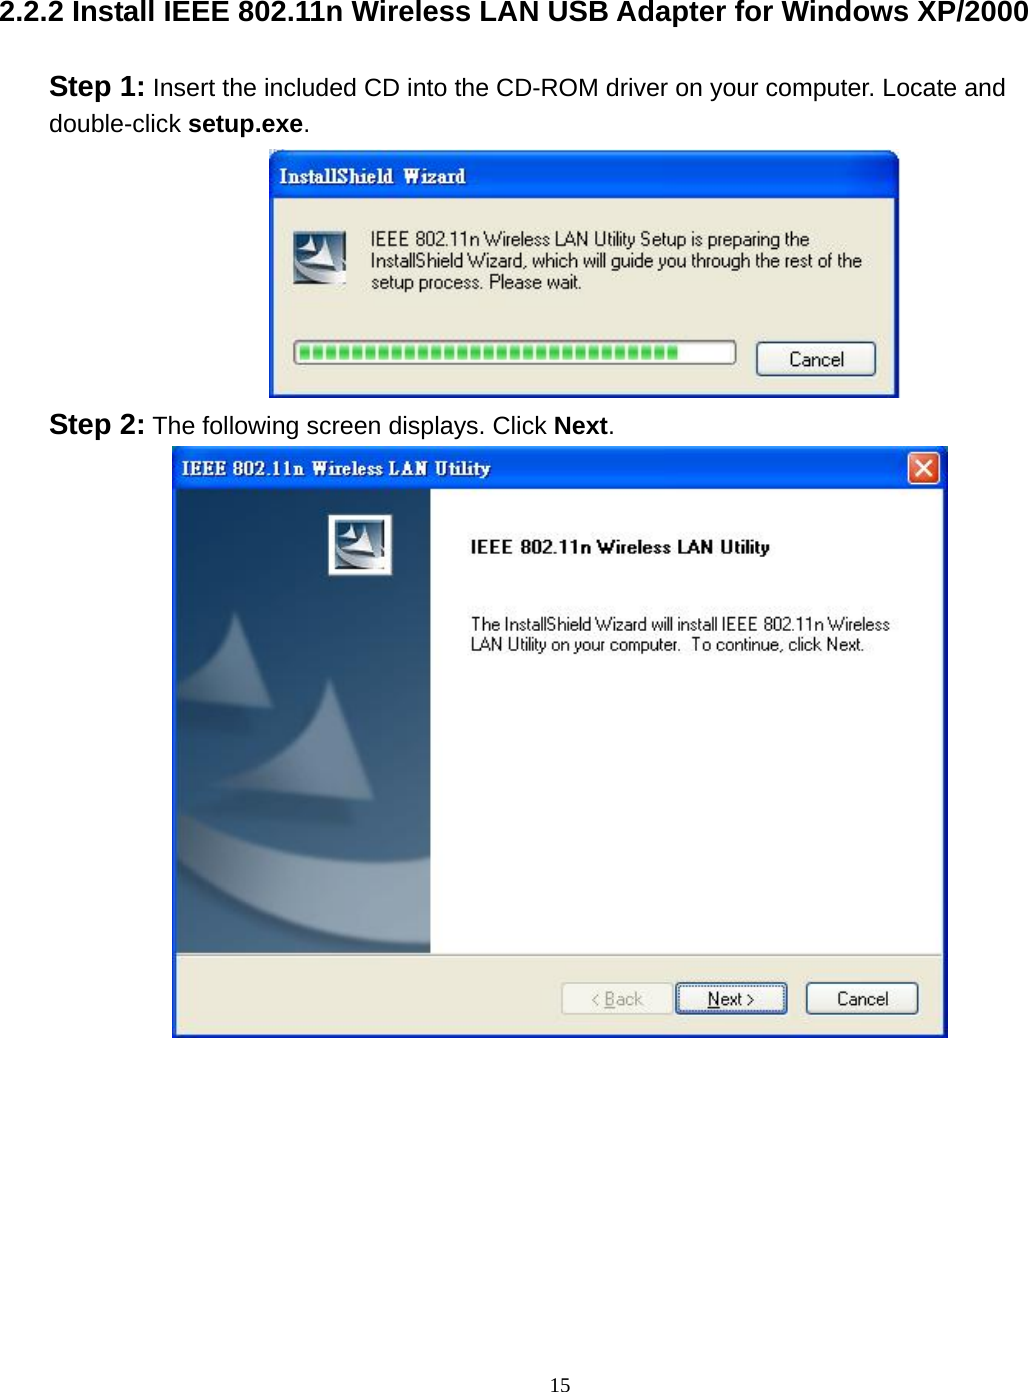  15 2.2.2 Install IEEE 802.11n Wireless LAN USB Adapter for Windows XP/2000 Step 1: Insert the included CD into the CD-ROM driver on your computer. Locate and double-click setup.exe.  Step 2: The following screen displays. Click Next.  